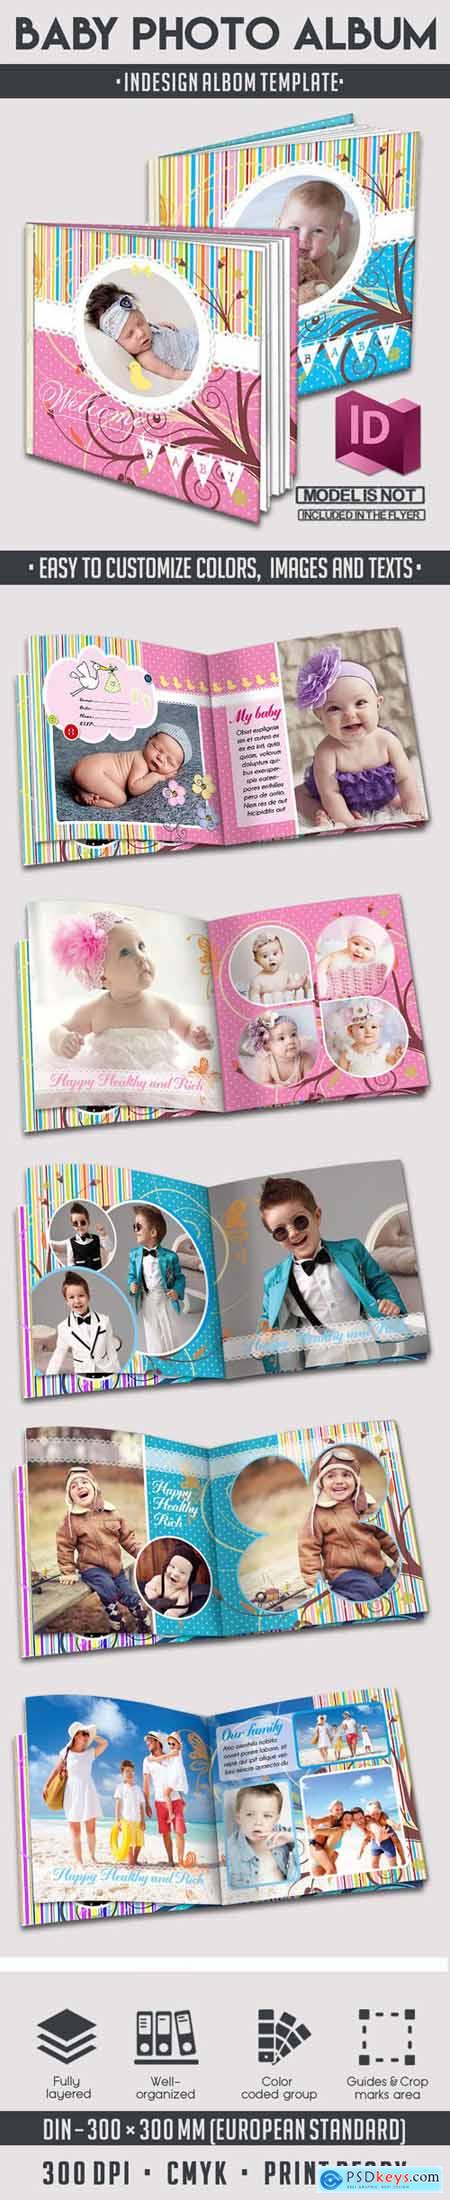 Baby Photo Album - InDesign INDD Templates - 12 Pages